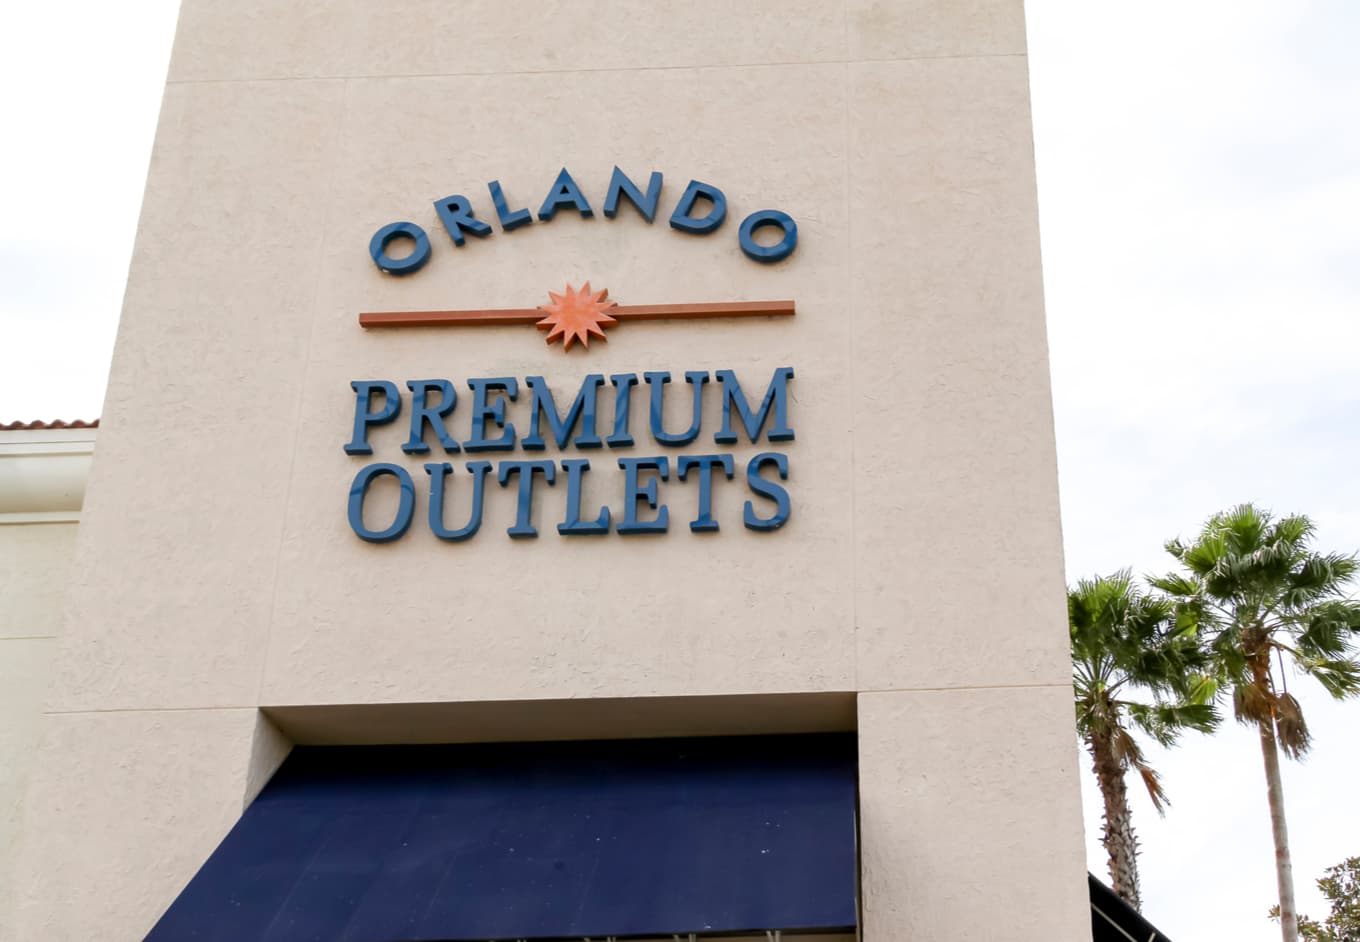 Ultimate Guide To Shopping In Downtown Orlando